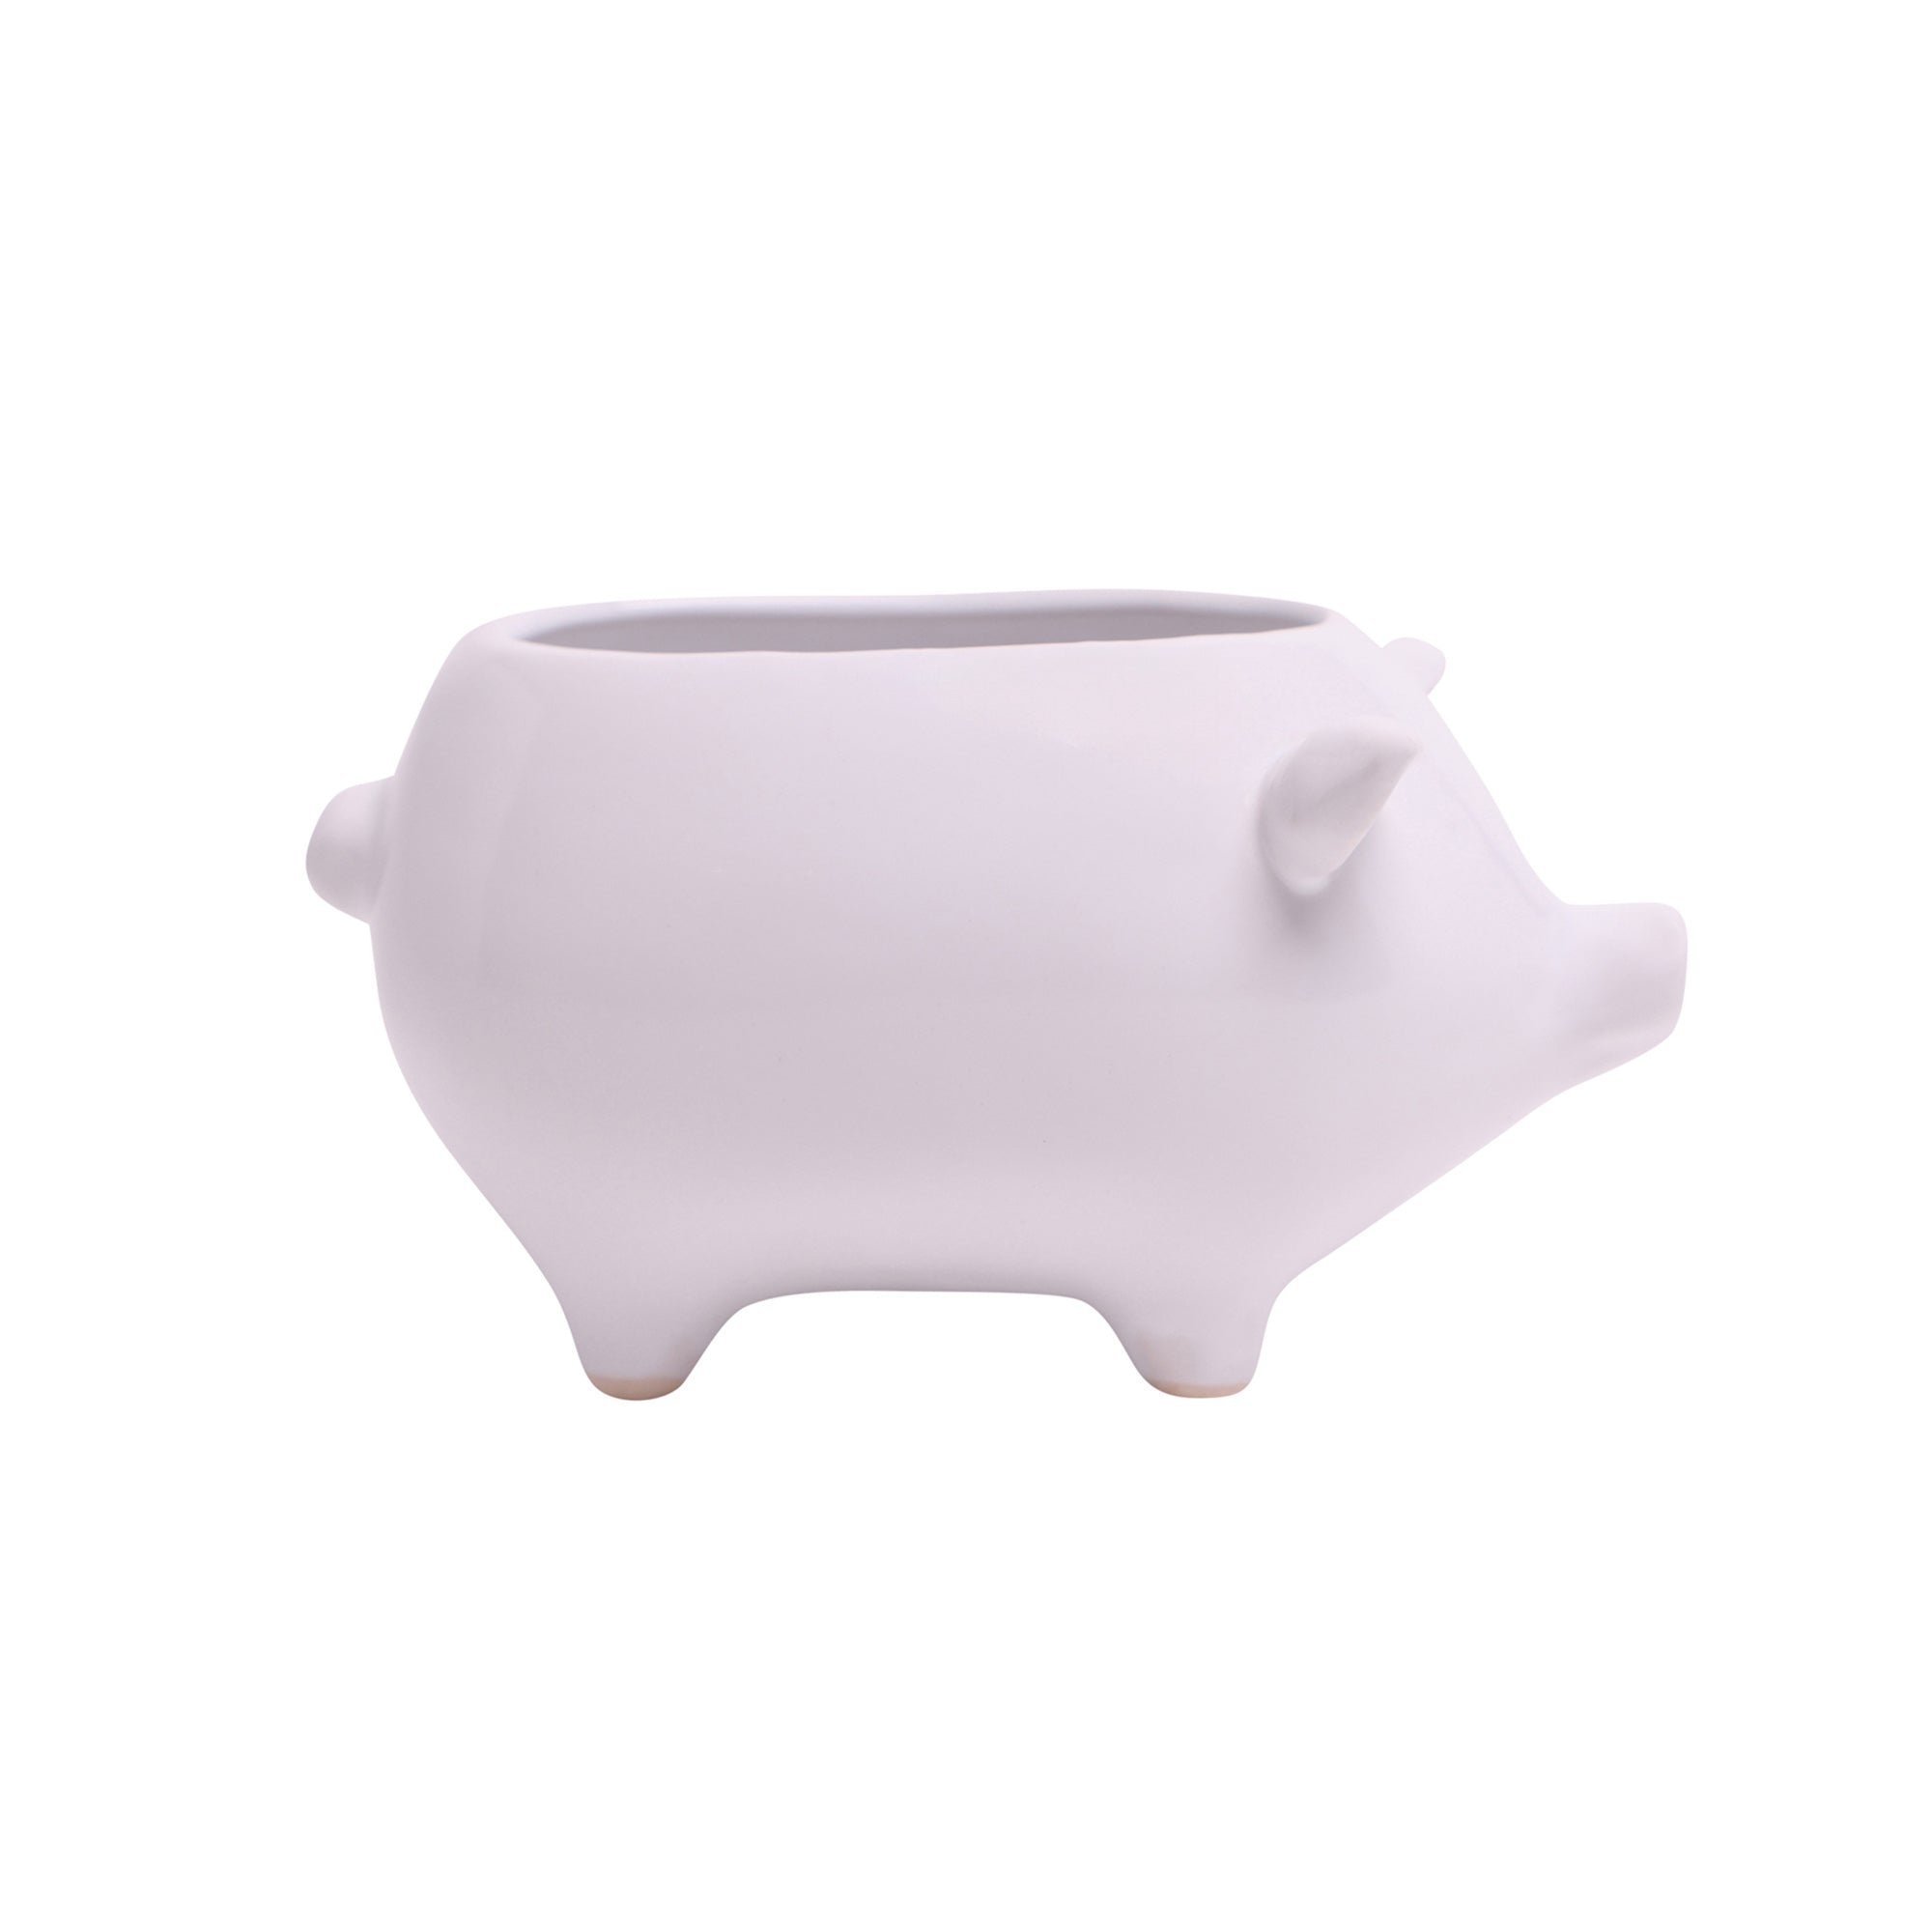 A white Pig Ceramic Indoor Plant Pot For Succulents from Chive Studio 2024, isolated on a white background, featuring a simplistic design with an opening on the top for plants.